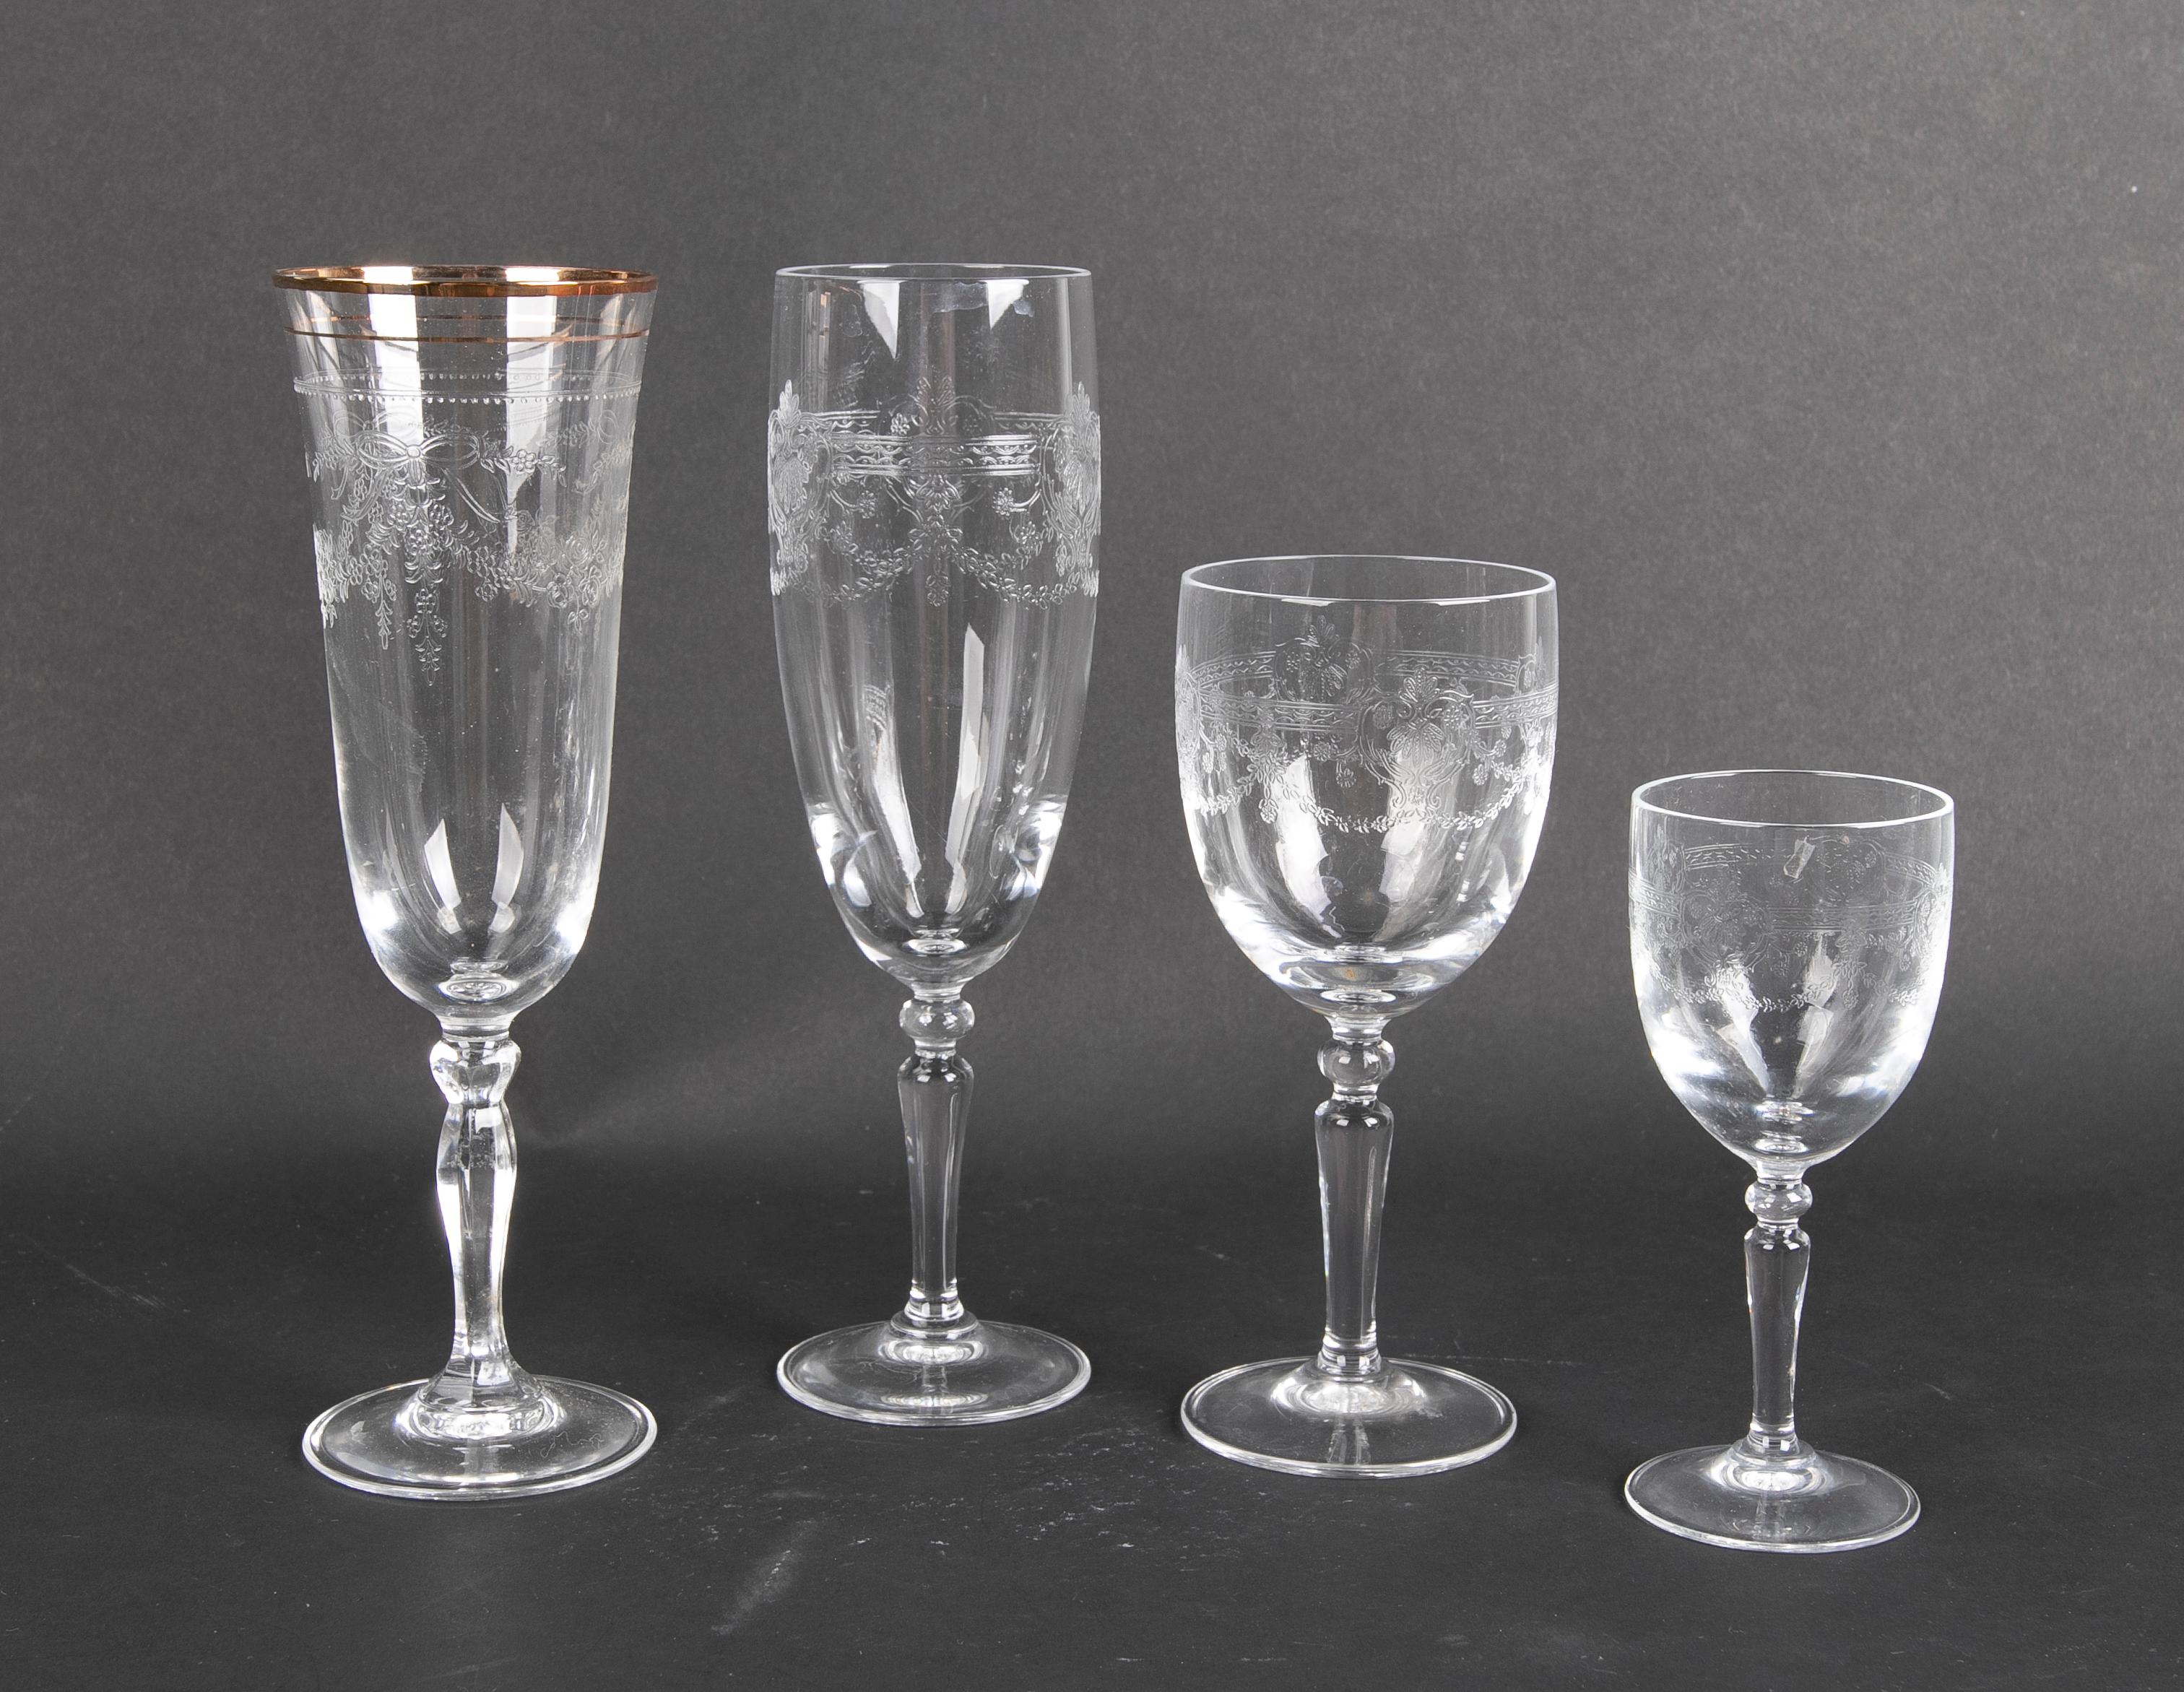 Crystal Glassware Composed by Sixty Hand-Carved Pieces
The measurement is of the largest cup.